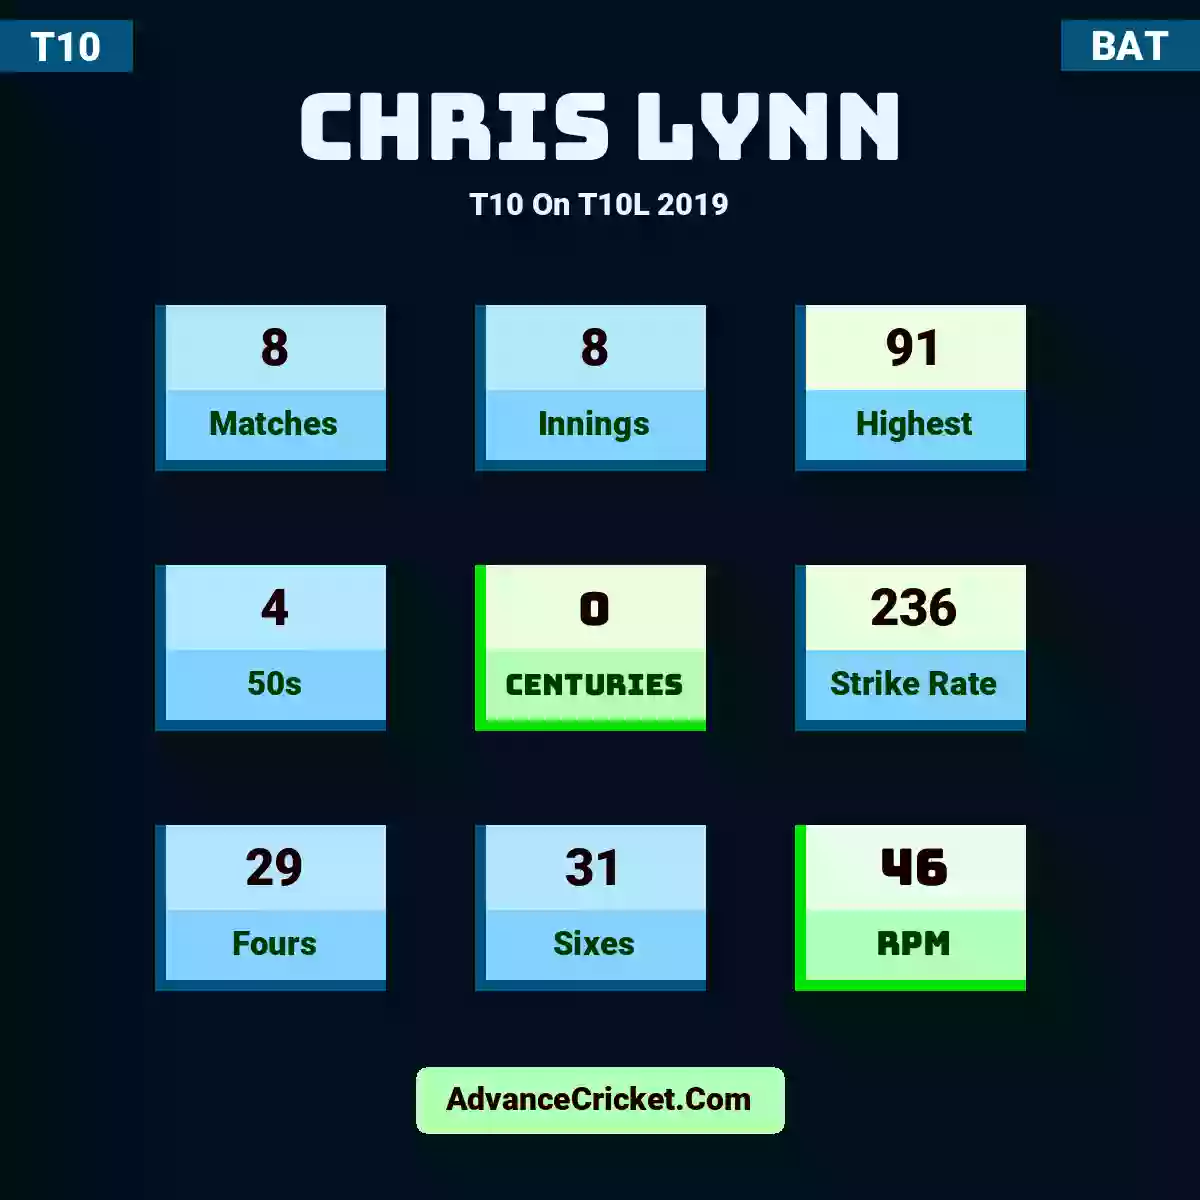 Chris Lynn T10  On T10L 2019, Chris Lynn played 8 matches, scored 91 runs as highest, 4 half-centuries, and 0 centuries, with a strike rate of 236. C.Lynn hit 29 fours and 31 sixes, with an RPM of 46.